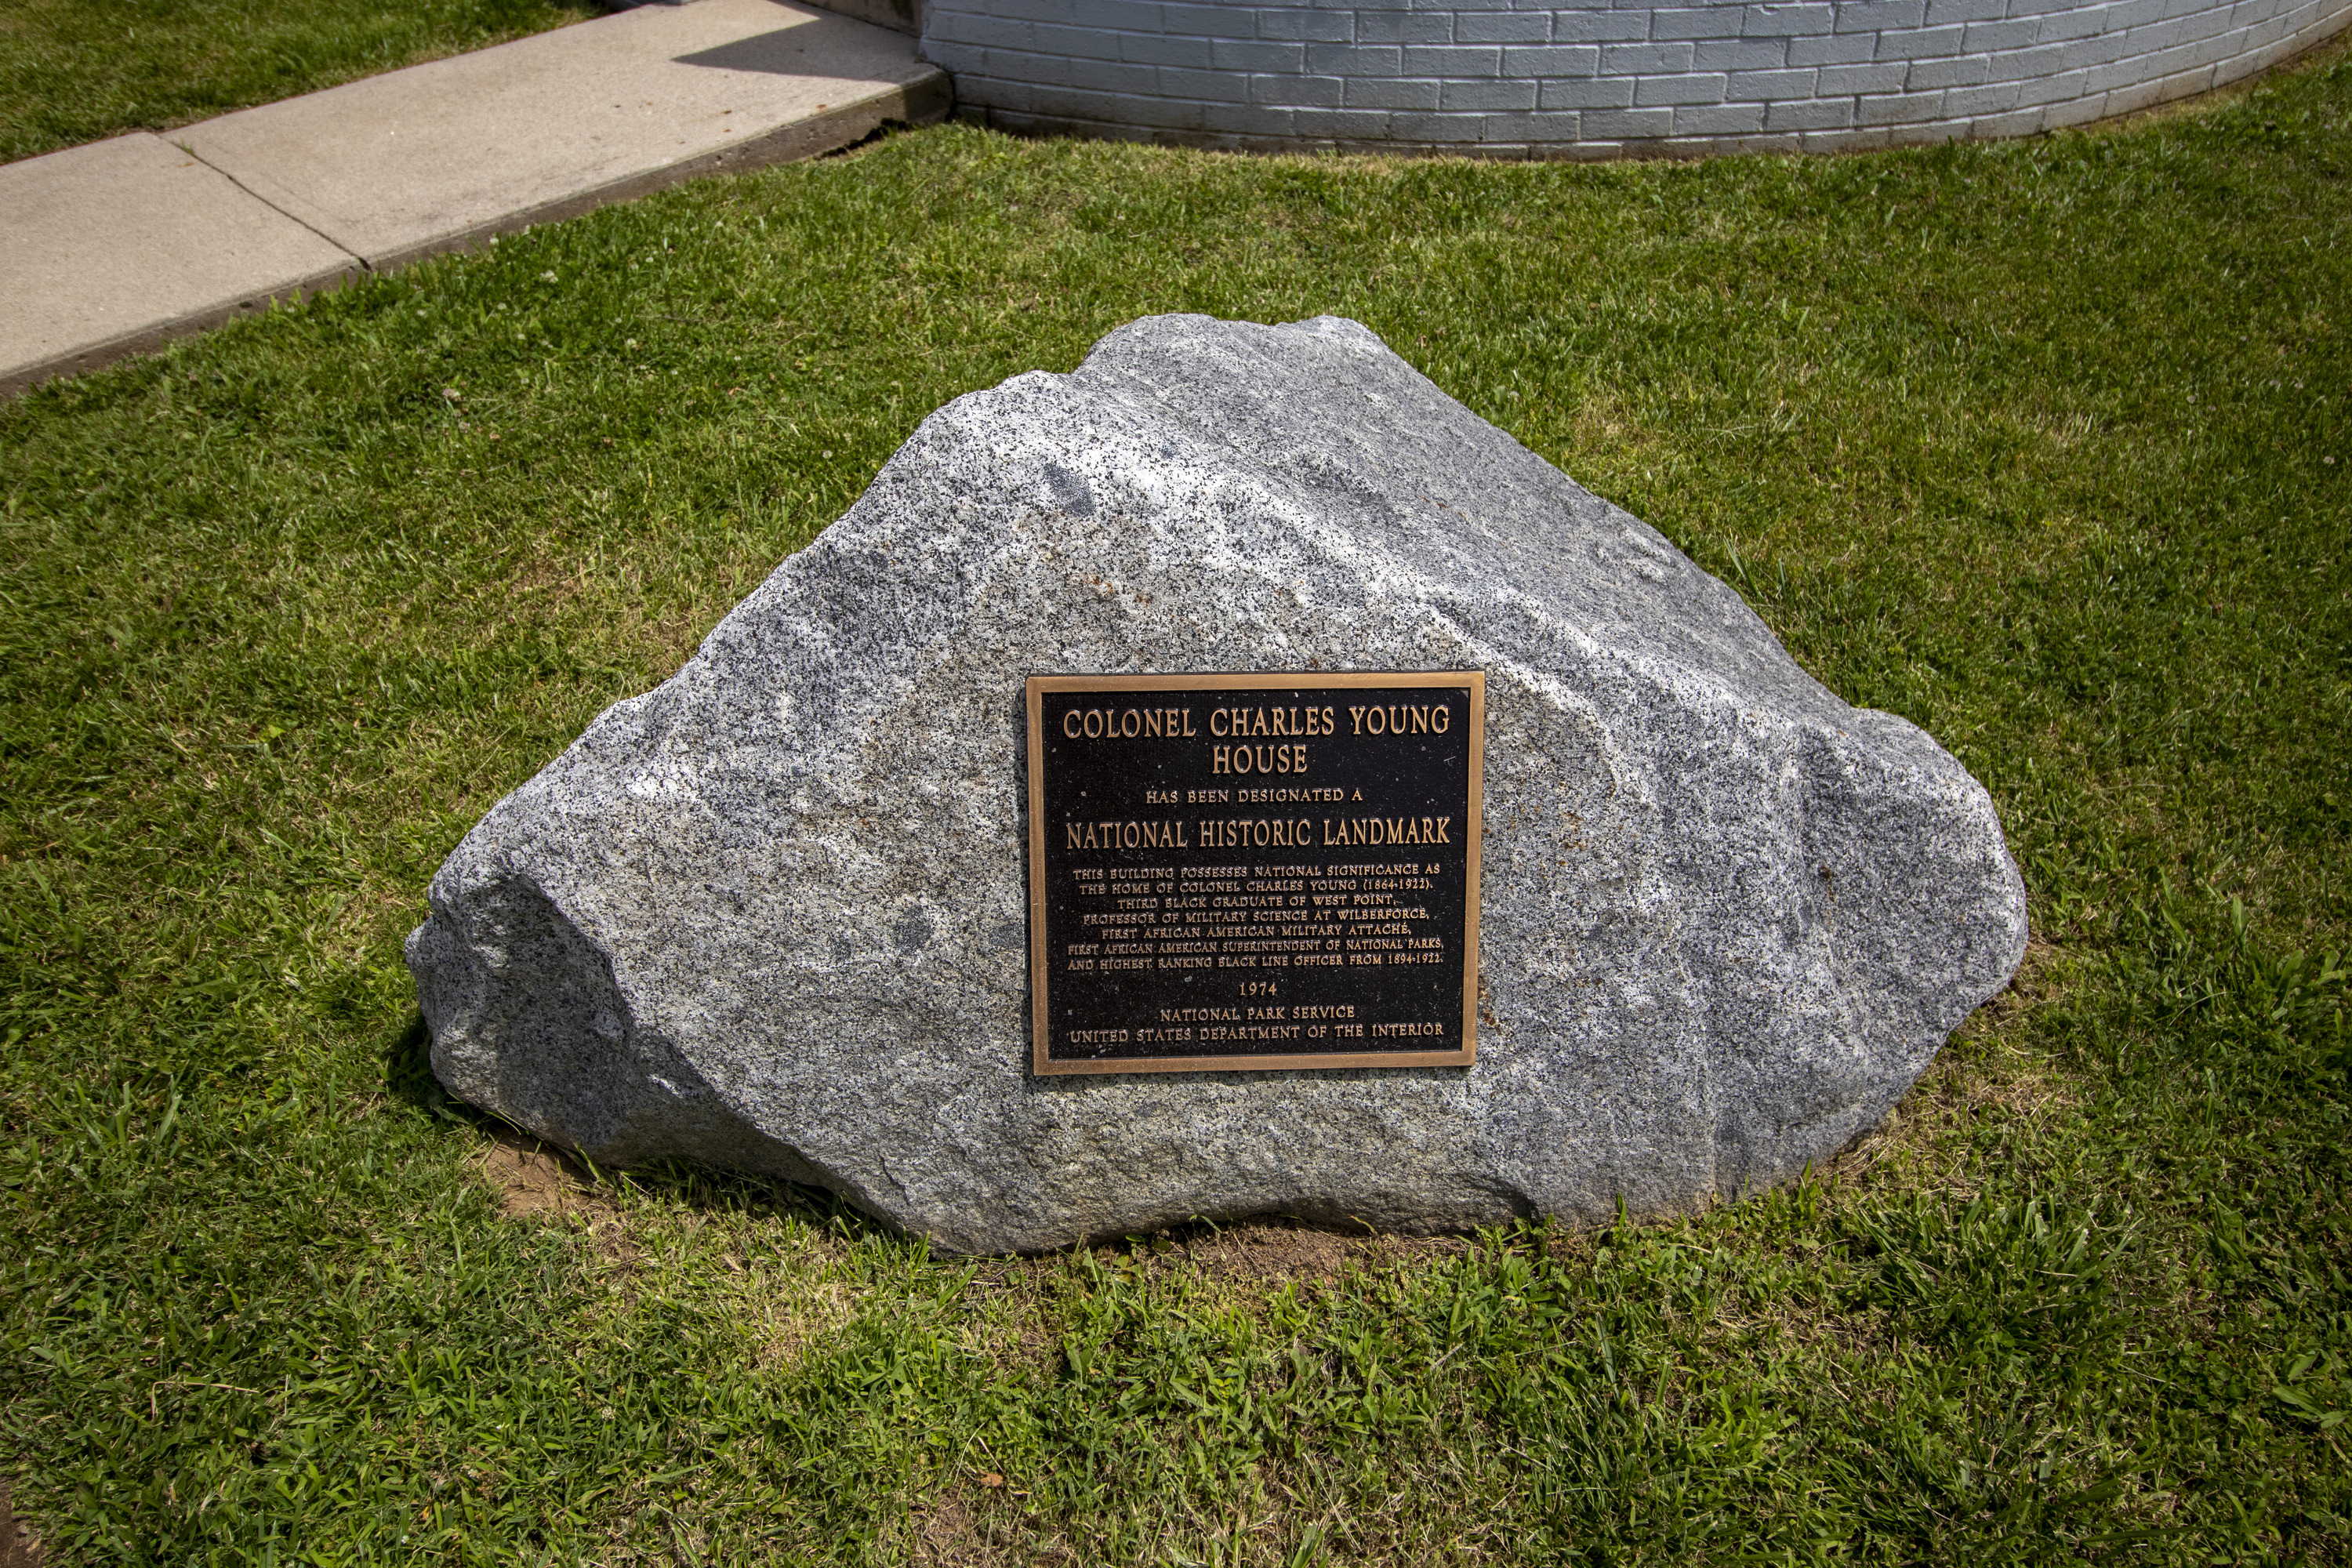 A large gray boulder with a bronze plaque affixed to it, top text reads COLONEL CHARLES YOUNG HOUSE, NATIONAL HISTORIC LANDMARK